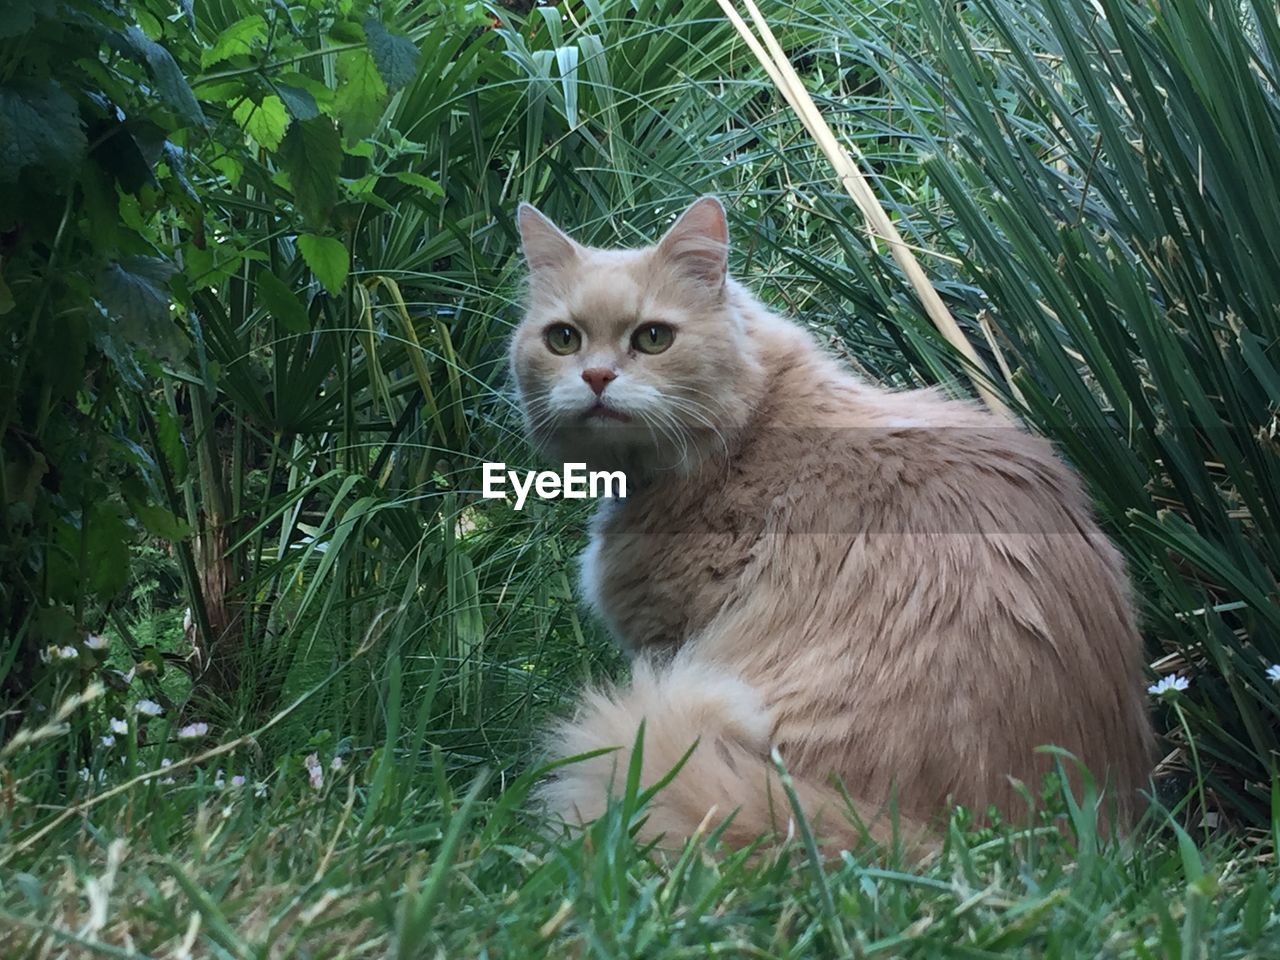 cat, animal themes, animal, mammal, pet, domestic animals, domestic cat, feline, plant, one animal, grass, whiskers, small to medium-sized cats, felidae, green, nature, no people, field, portrait, looking at camera, land, growth, sitting, looking, wild cat, day, outdoors, front or back yard